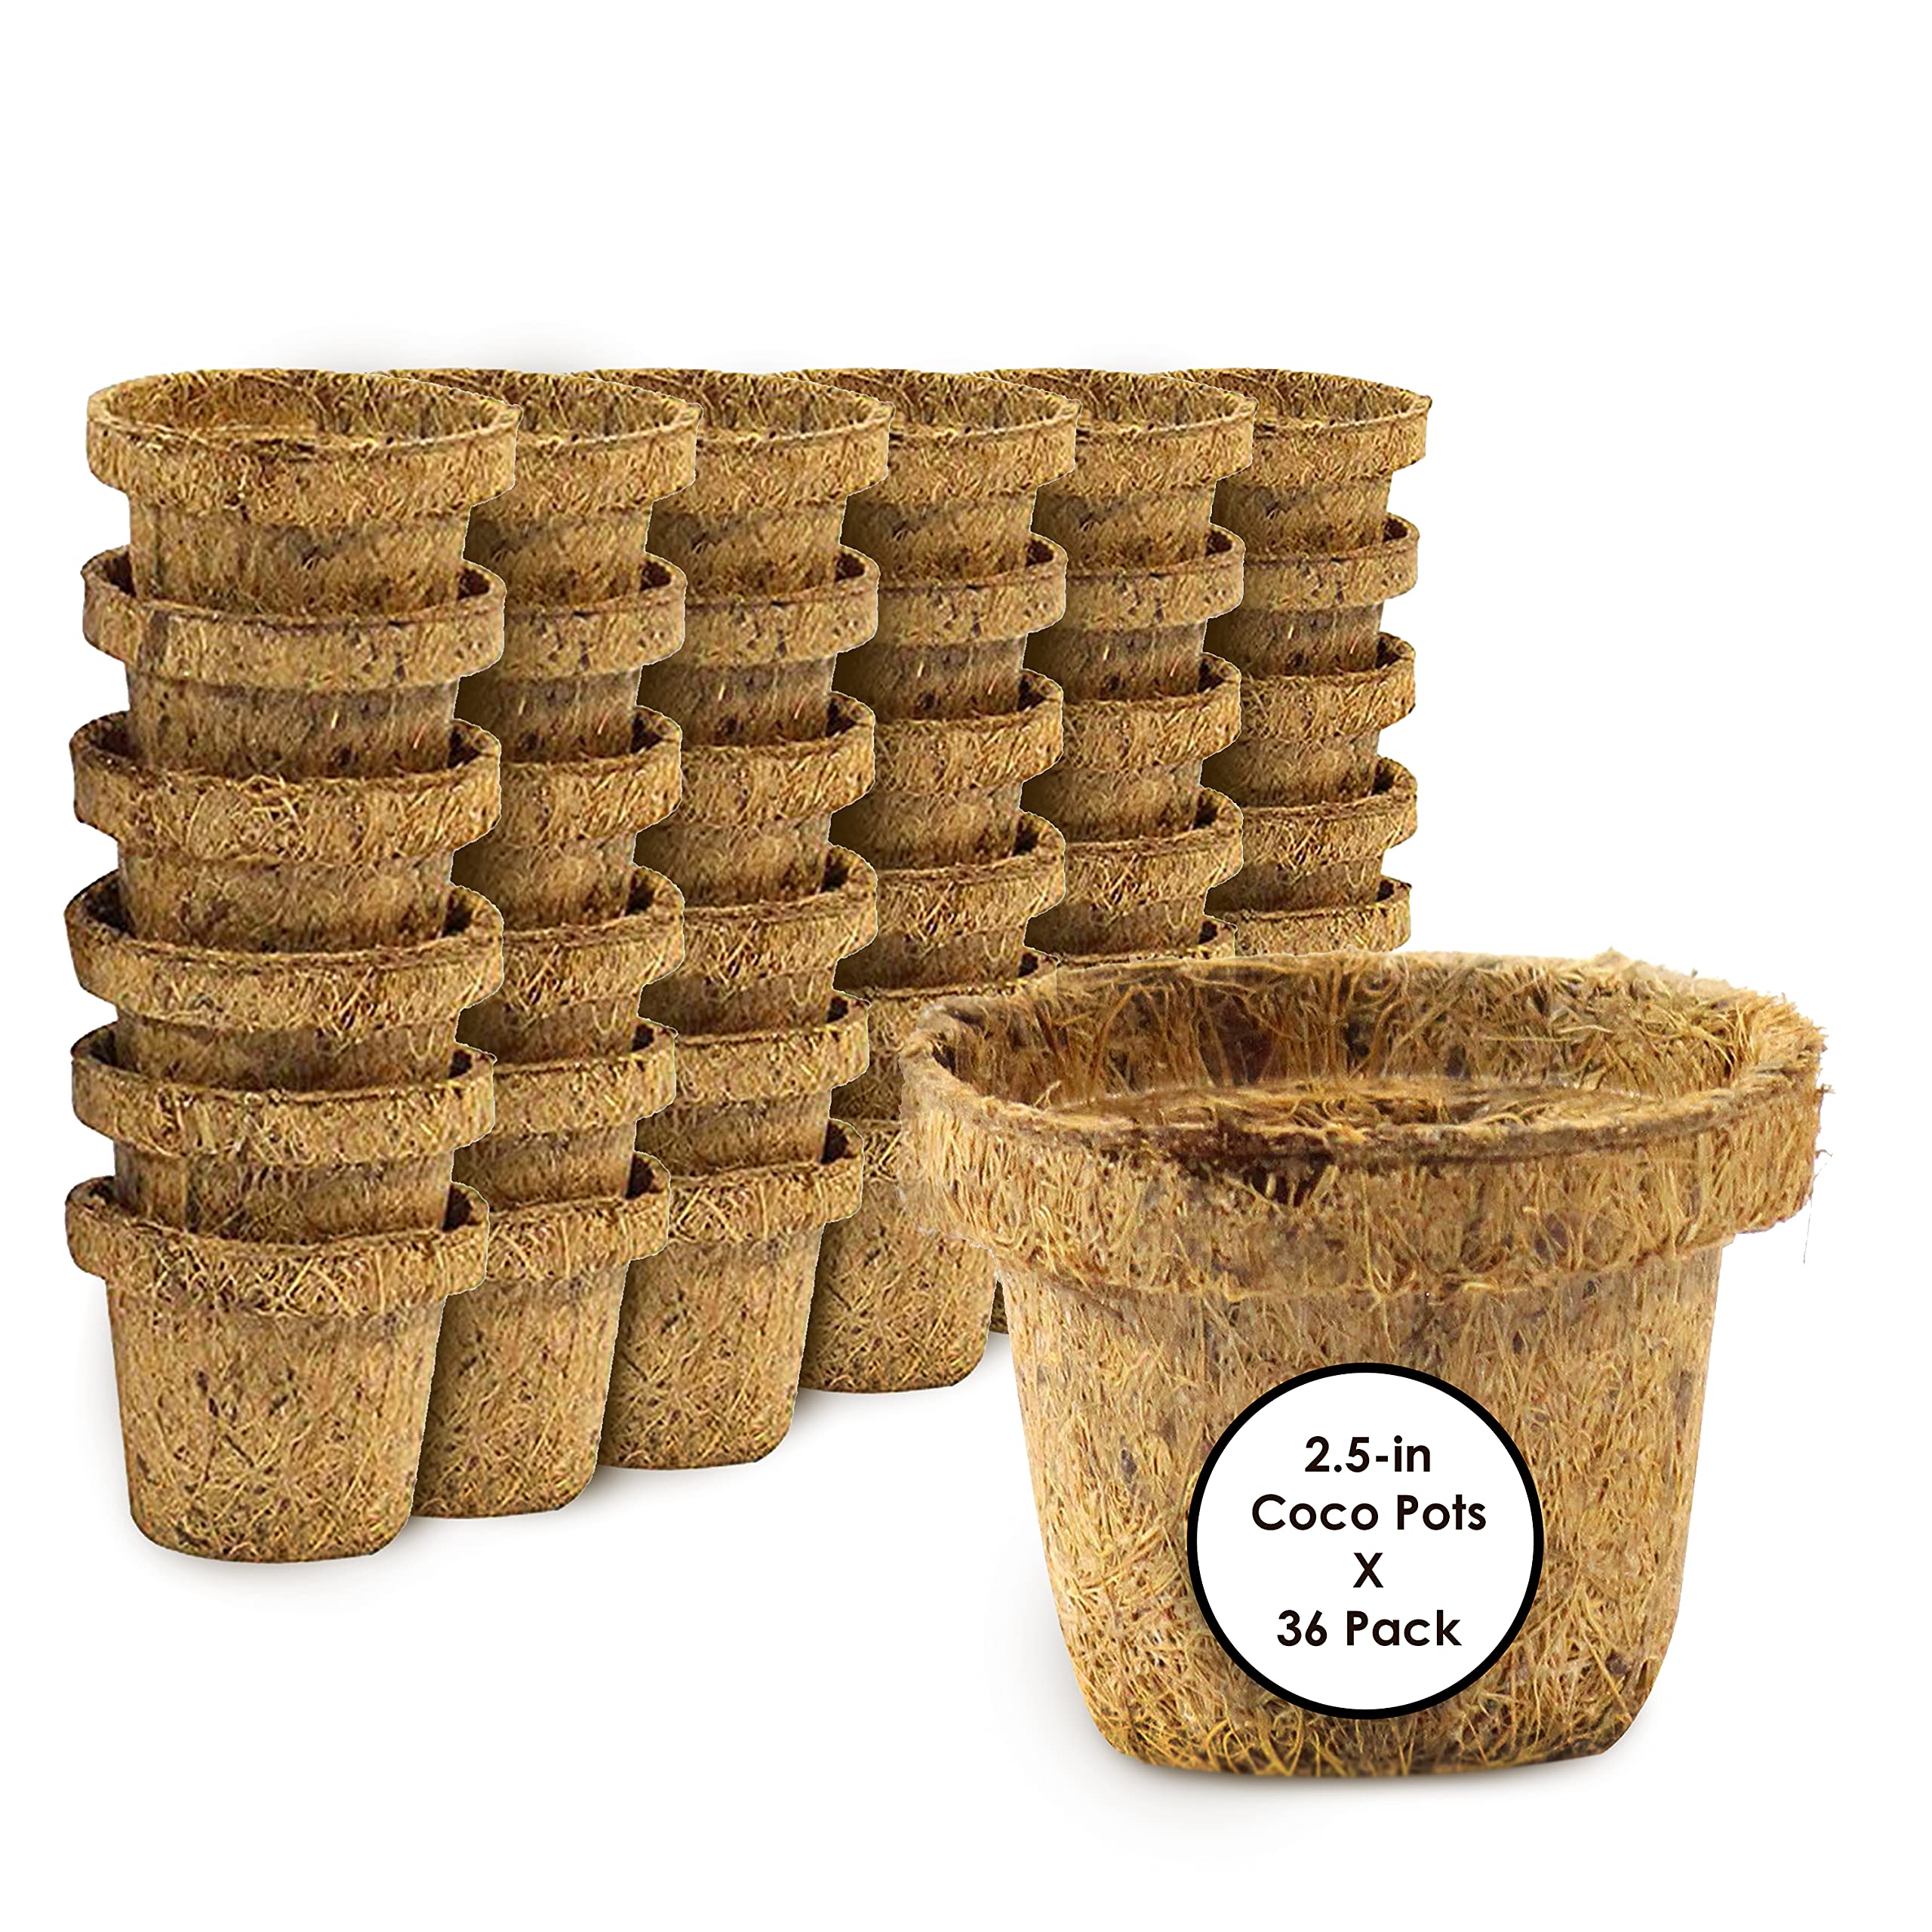 Organic Coco Coir Bricks Coconut Fiber for Growing Natural Seed Starter 5 Pack 